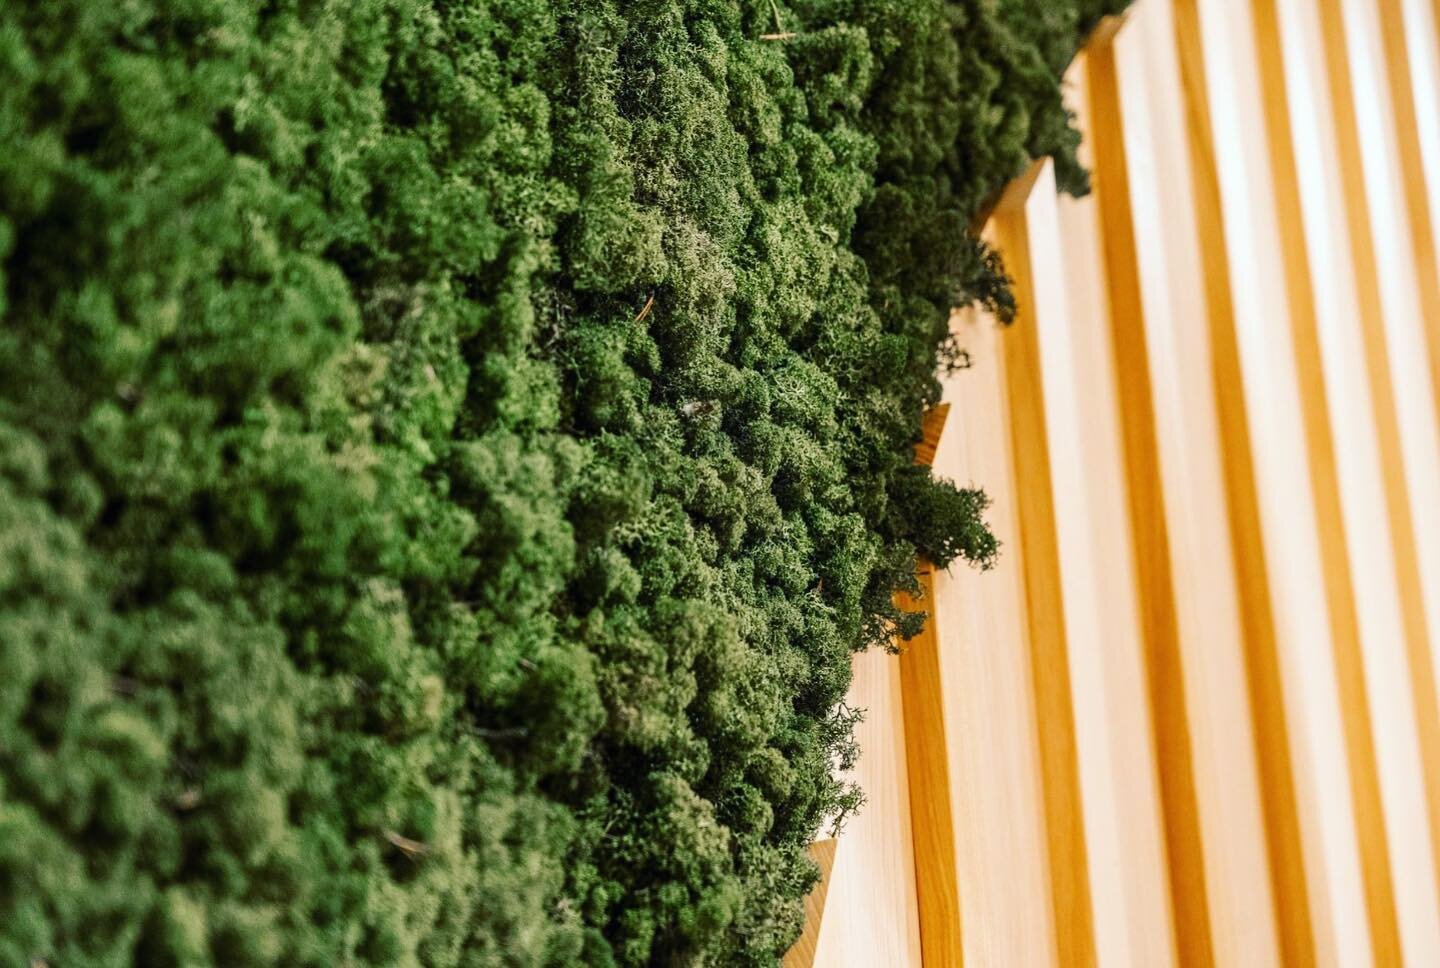 ✳️✳️✳️
Up close moss and wood such a great combination to add warmth and texture to your space.

✳️Zero Maintenance 
✳️Sound Absorbing
❇️Antistatic - no dust settles on it! ✅

#perthnow #perthlife #perthisok #perthinteriors #interiorstyling #interior